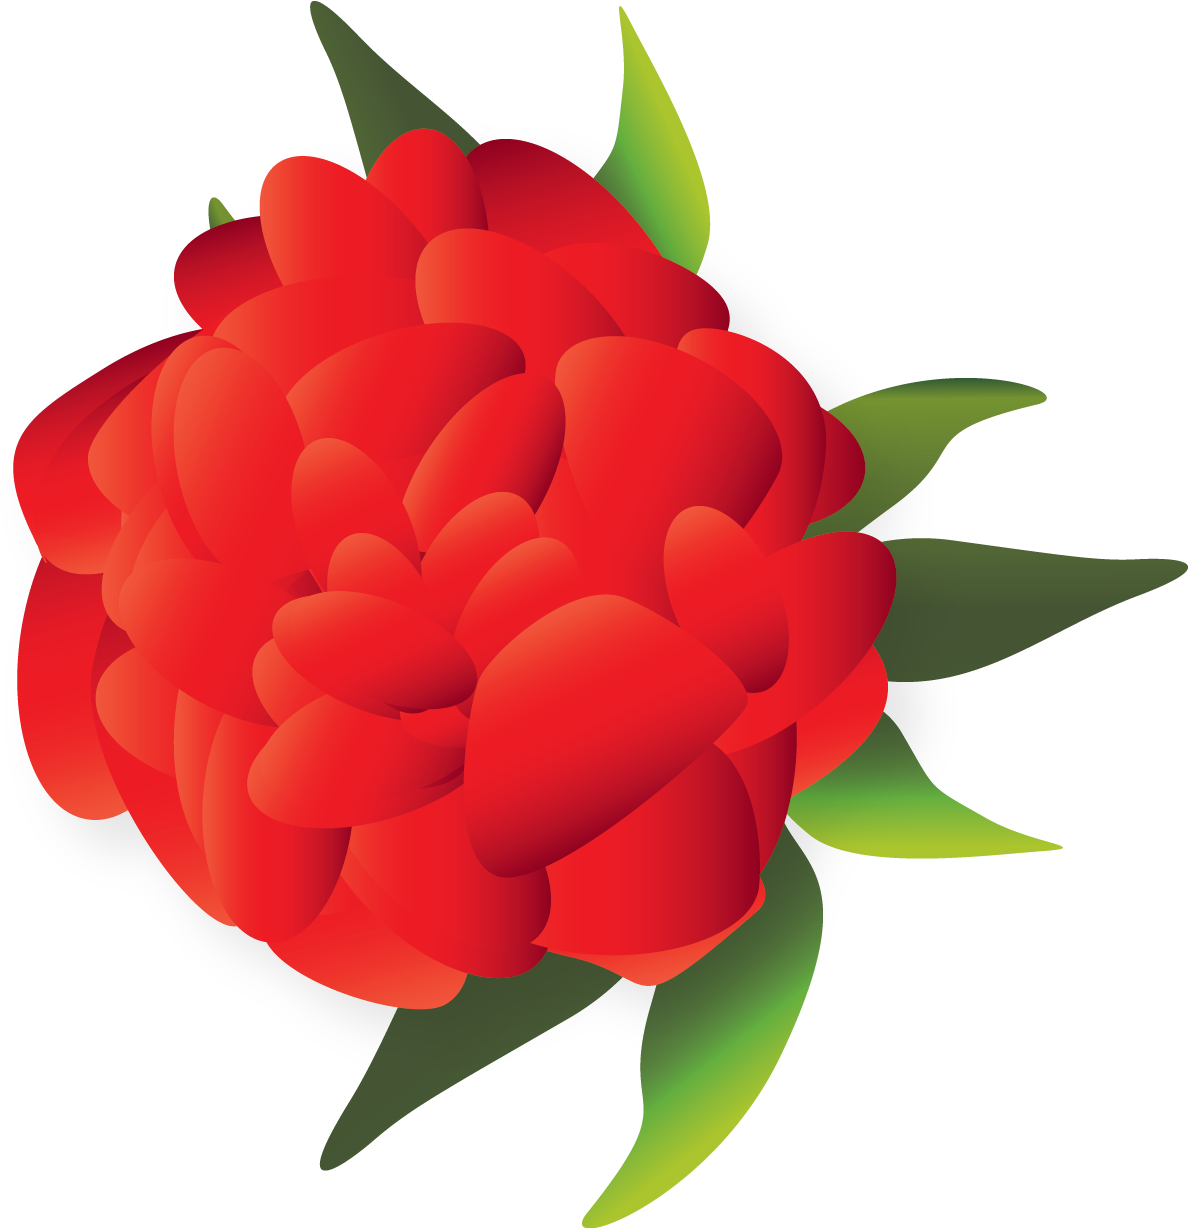 floral spanishs - Clip Art Library